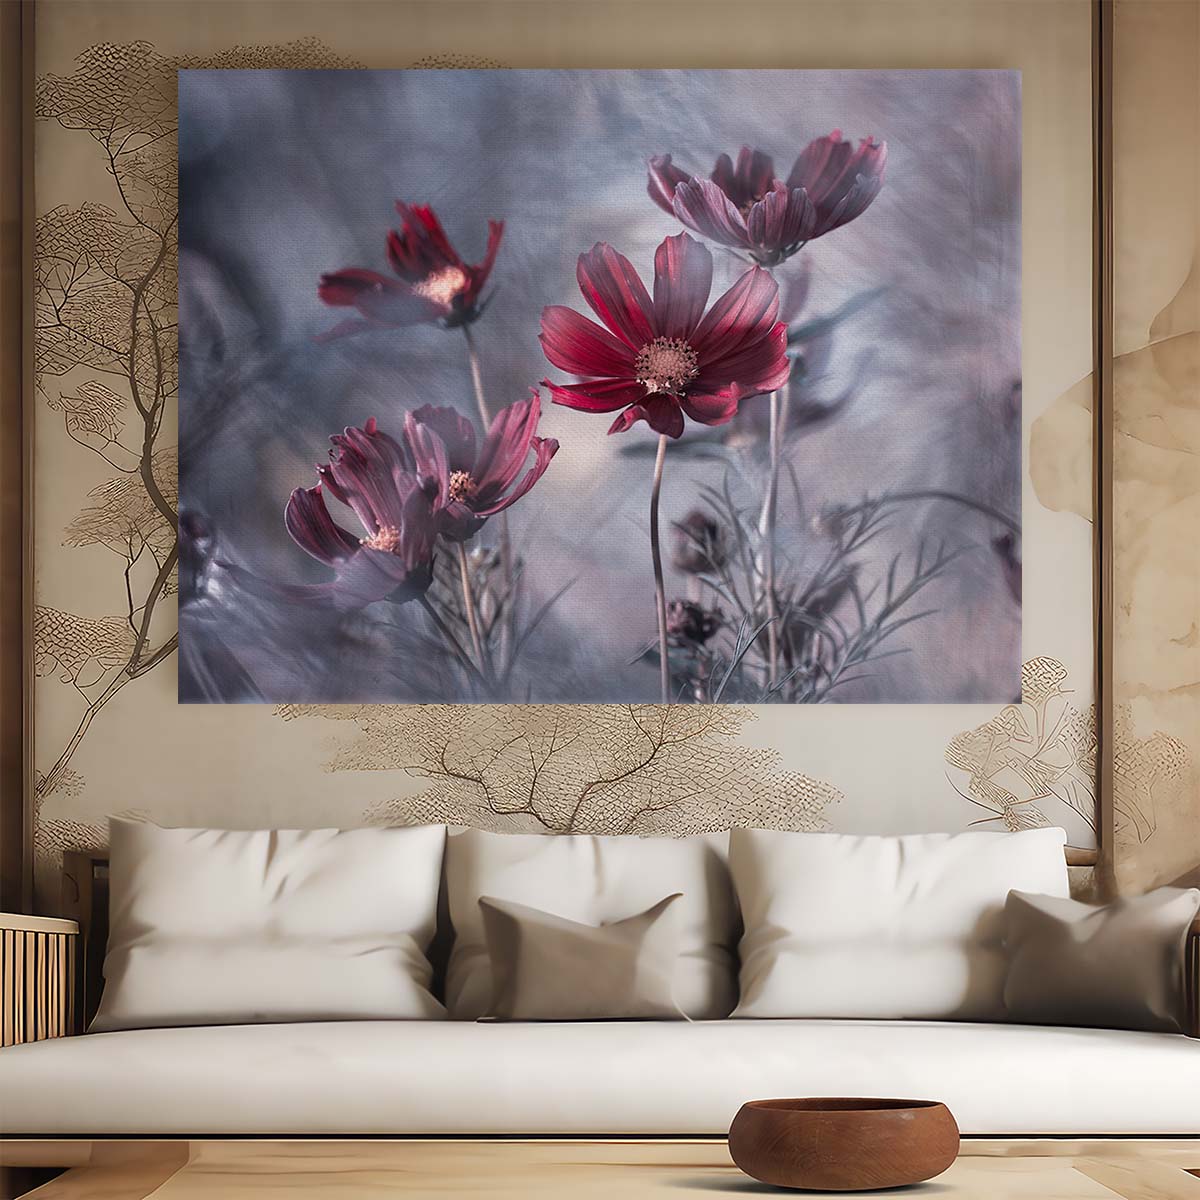 Passionate Red Cosmos Blossoms Macro Floral Wall Art by Luxuriance Designs. Made in USA.